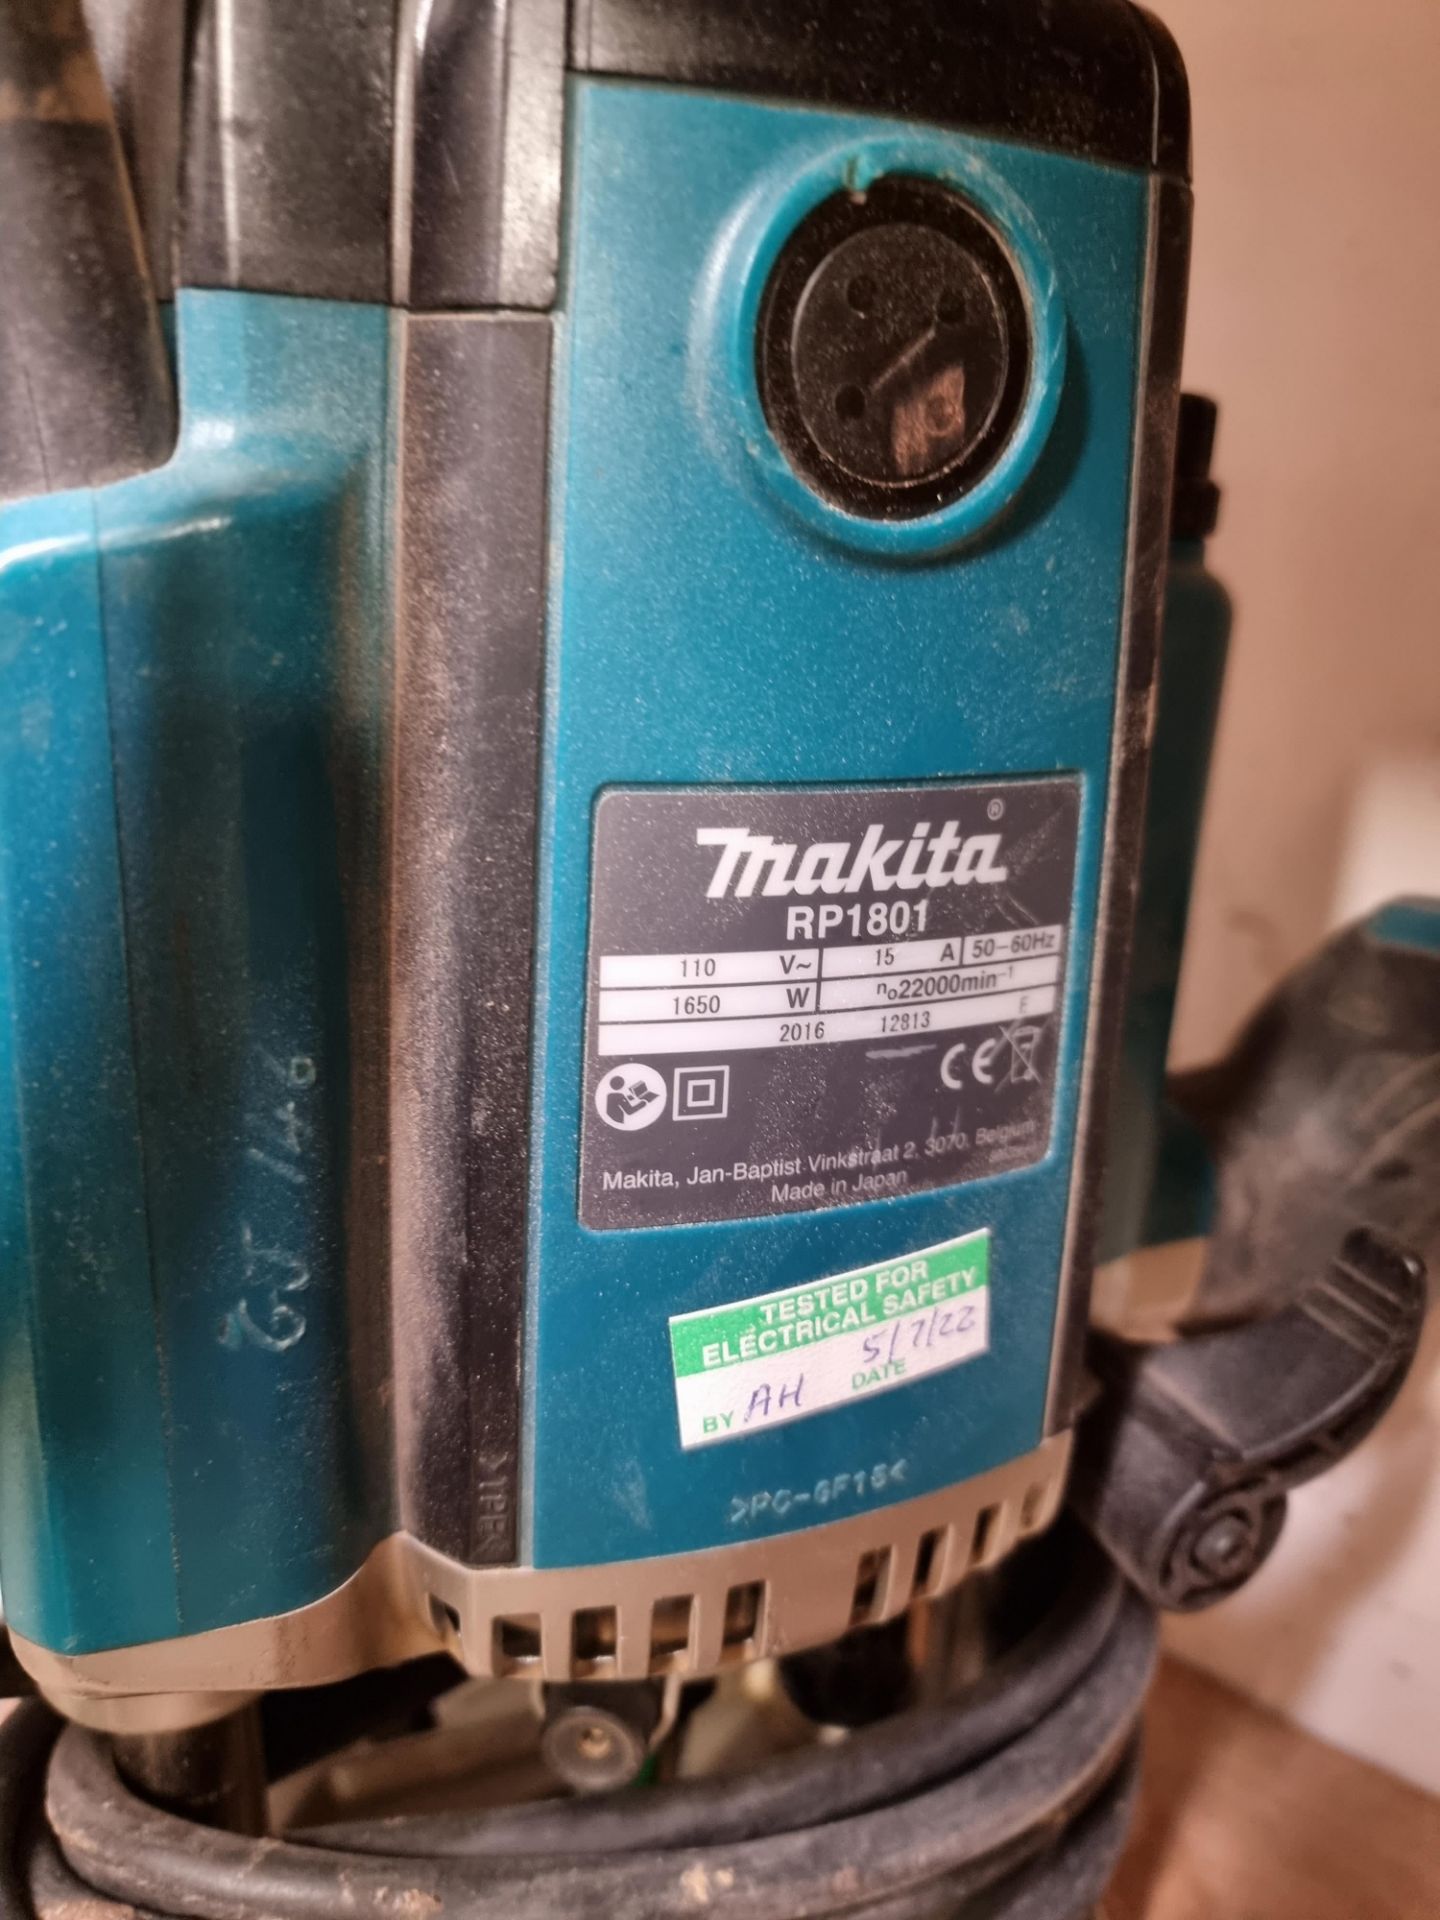 Contents of Shelf to include 4: Makita RP1801 Plunge Router - Image 2 of 3